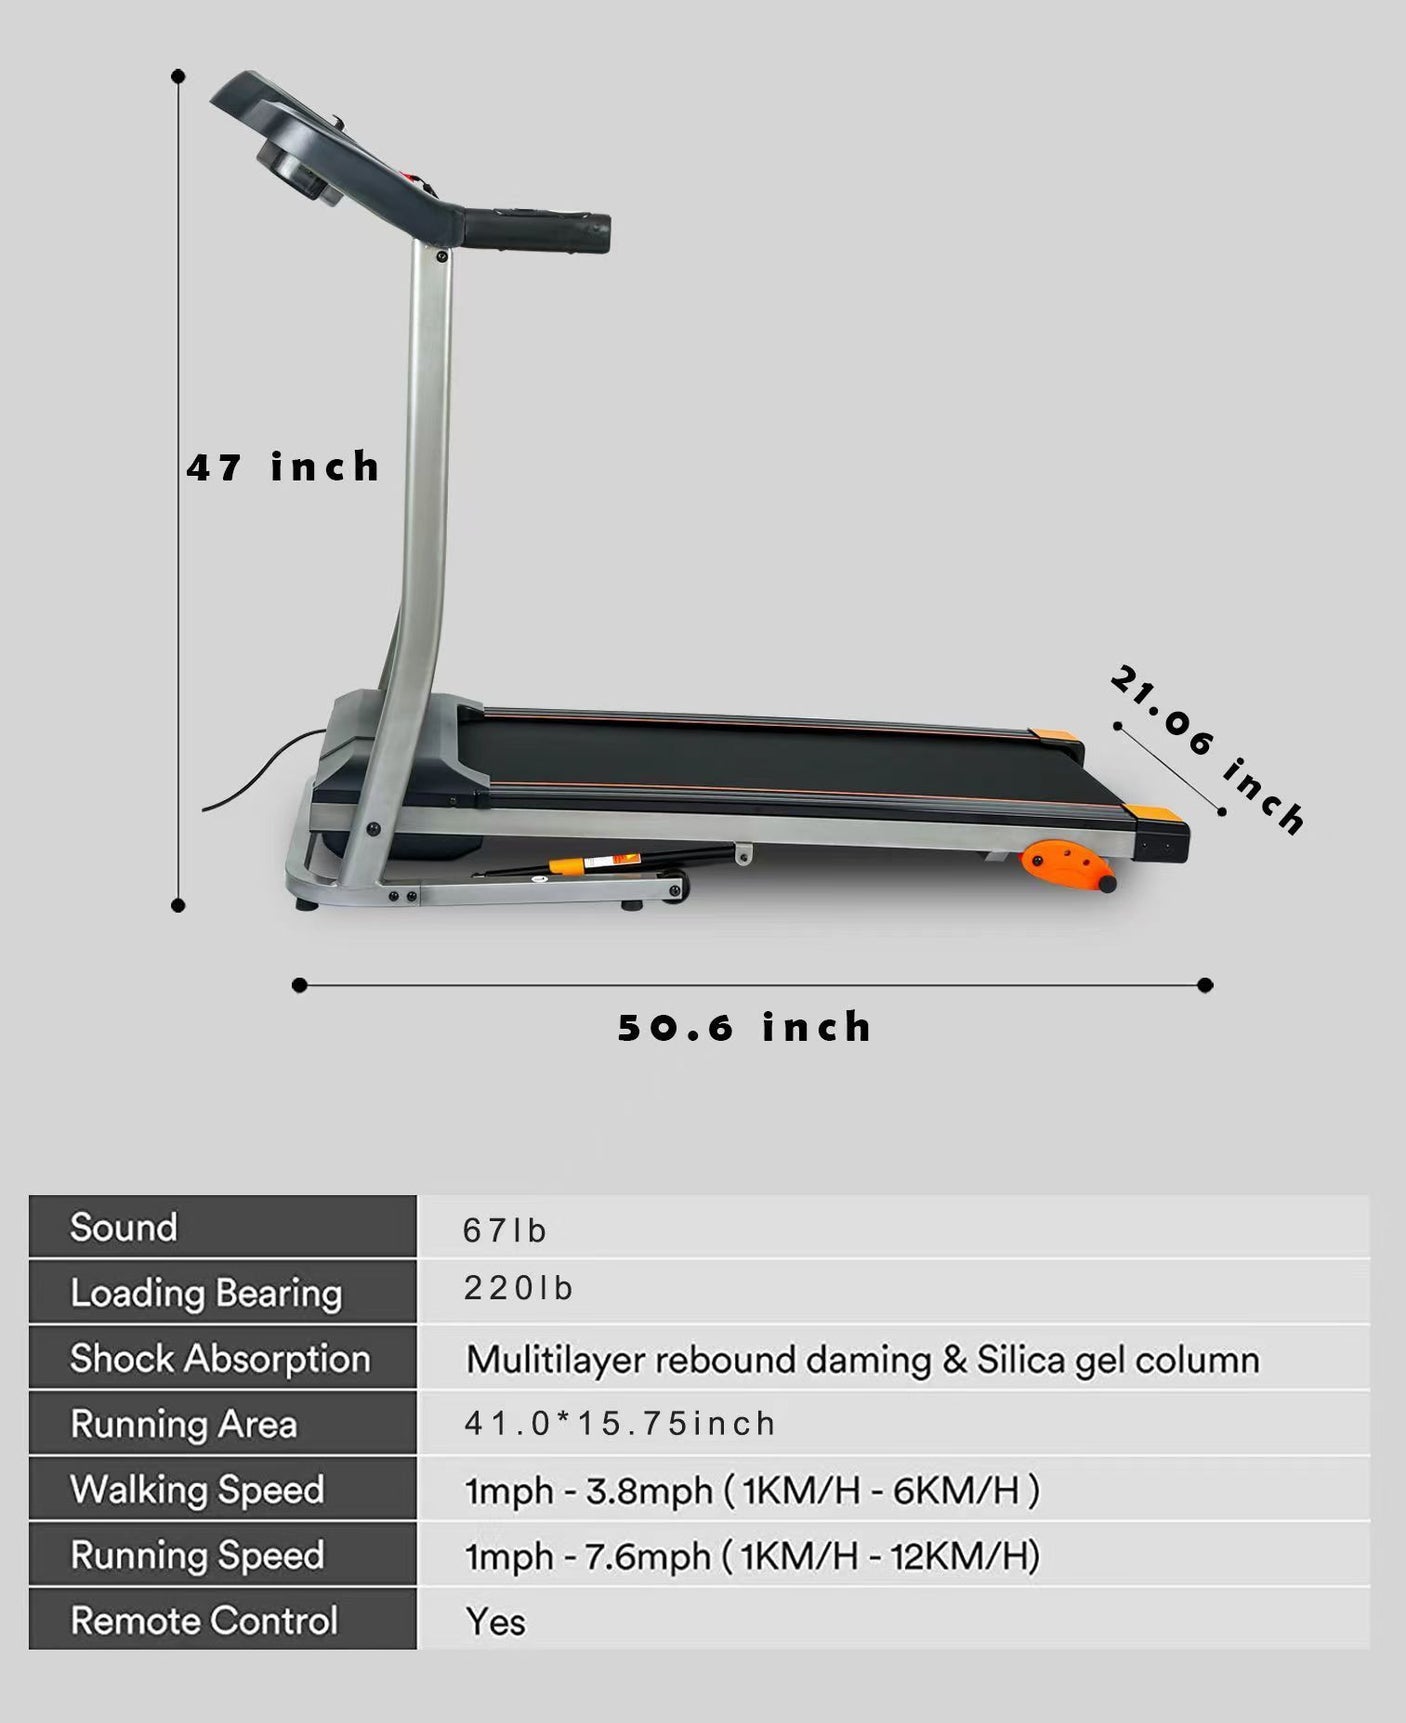 Folding Treadmill 2.5HP 12KM/H, Foldable Home Fitness Equipment with LCD for Walking & Running, Cardio Exercise Machine, 4 Incline Levels, 12 Preset or Adjustable Programs, Bluetooth Connectivity, Bla